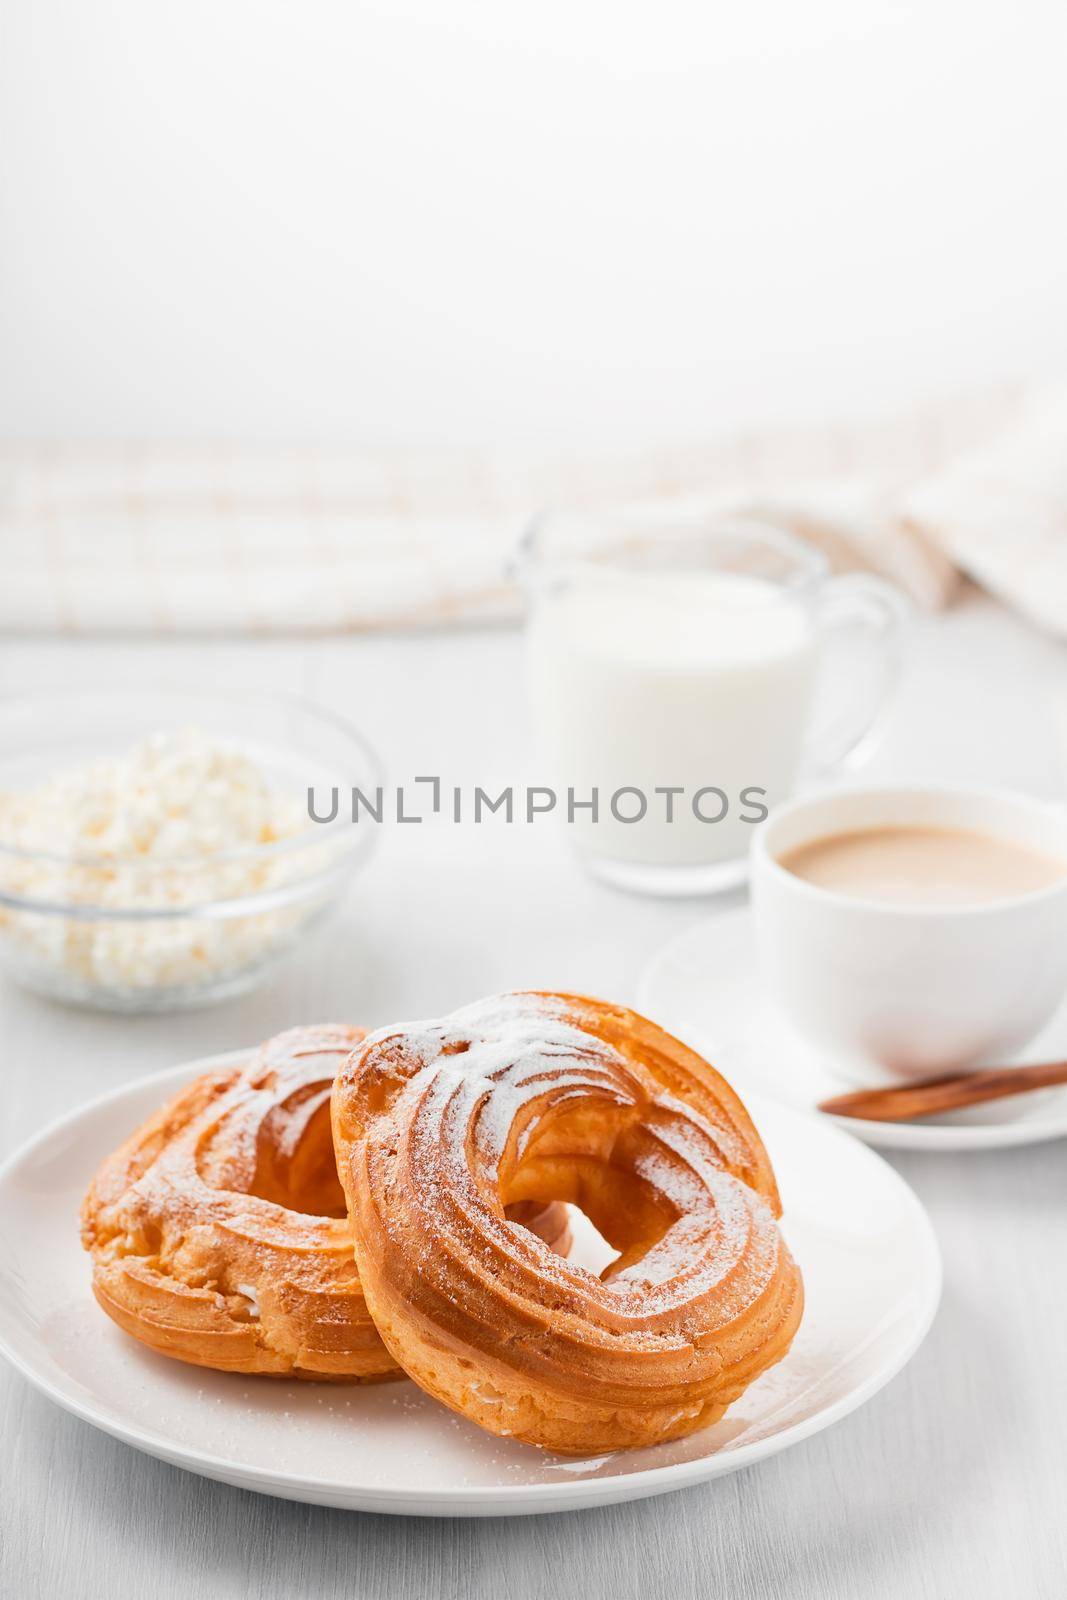 Morning coffee with cake. Custard rings, coffee, cream, cottage cheese on a white wooden table. Vertical image by galsand